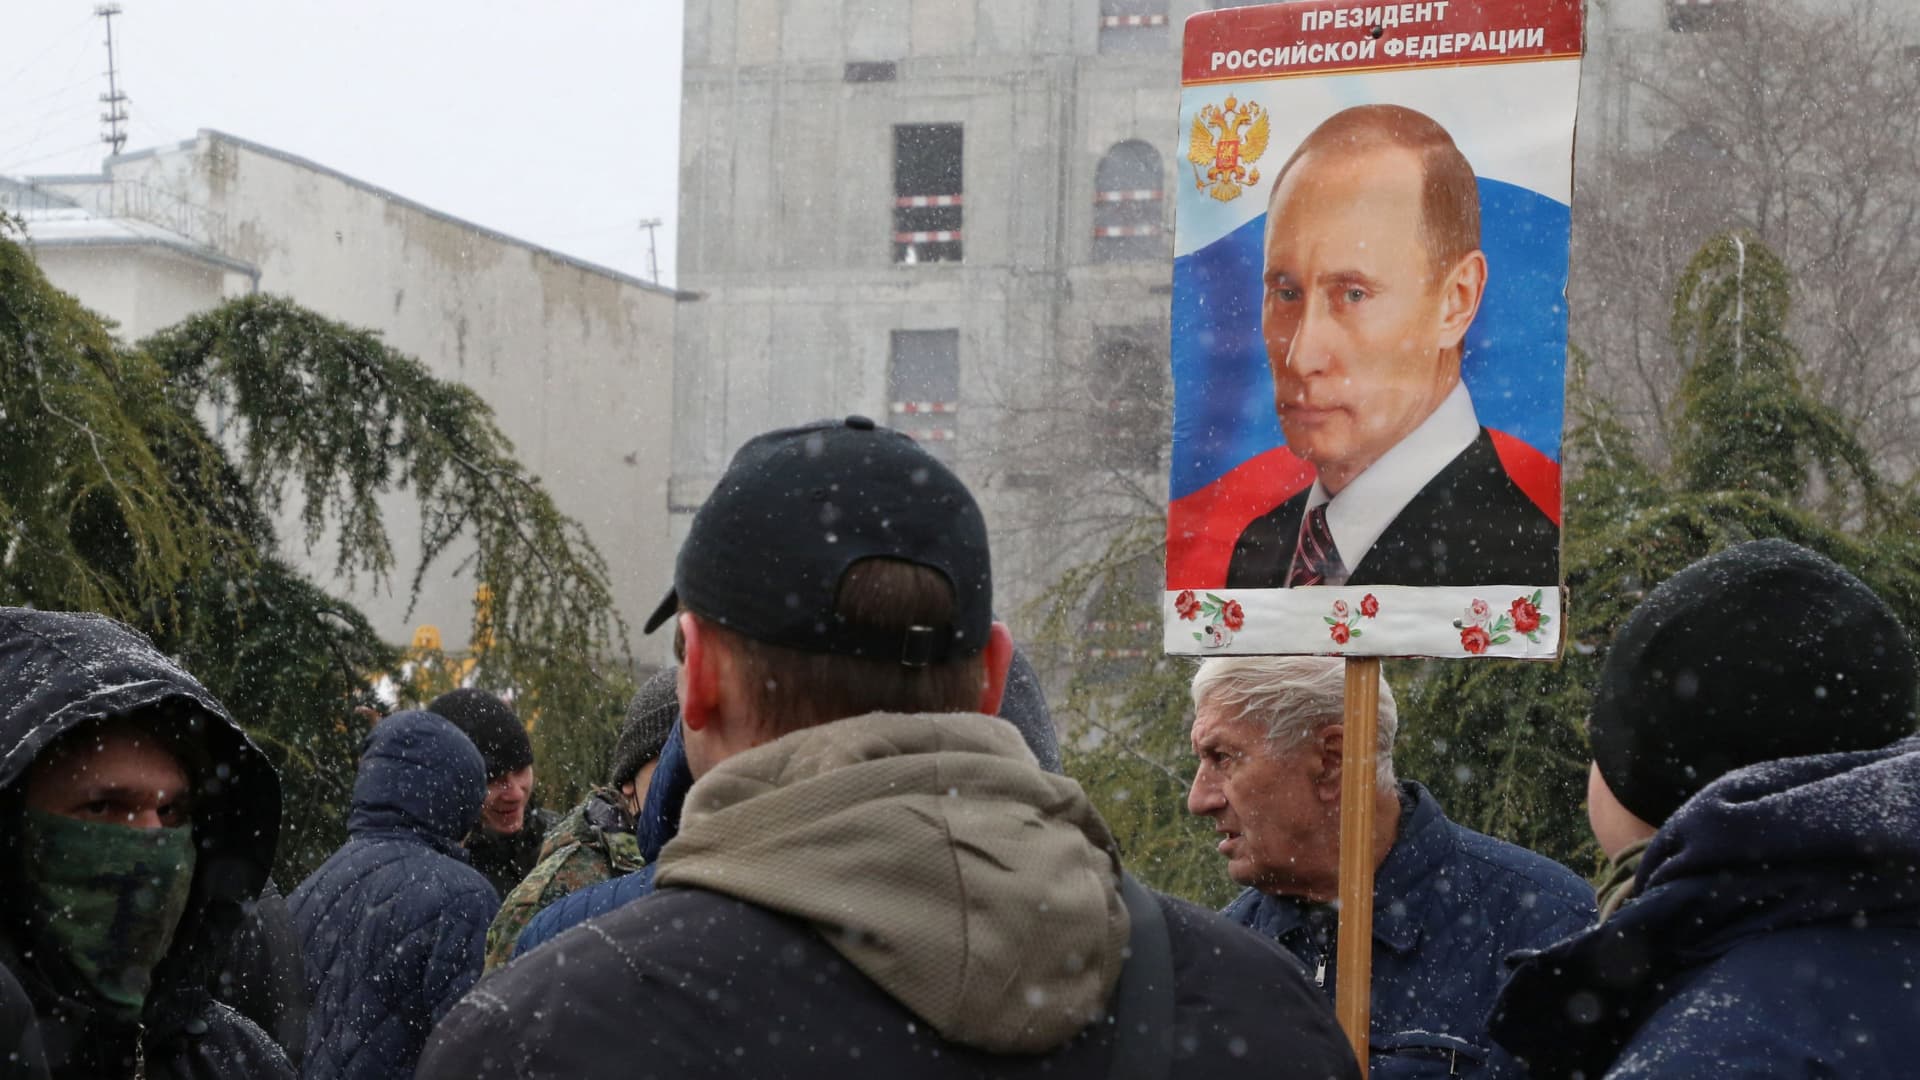 A man holds a portrait of Russian President Vladimir Putin during celebrations of the eighth anniversary of Russia's annexation of Crimea in Simferopol, Crimea March 18, 2022.